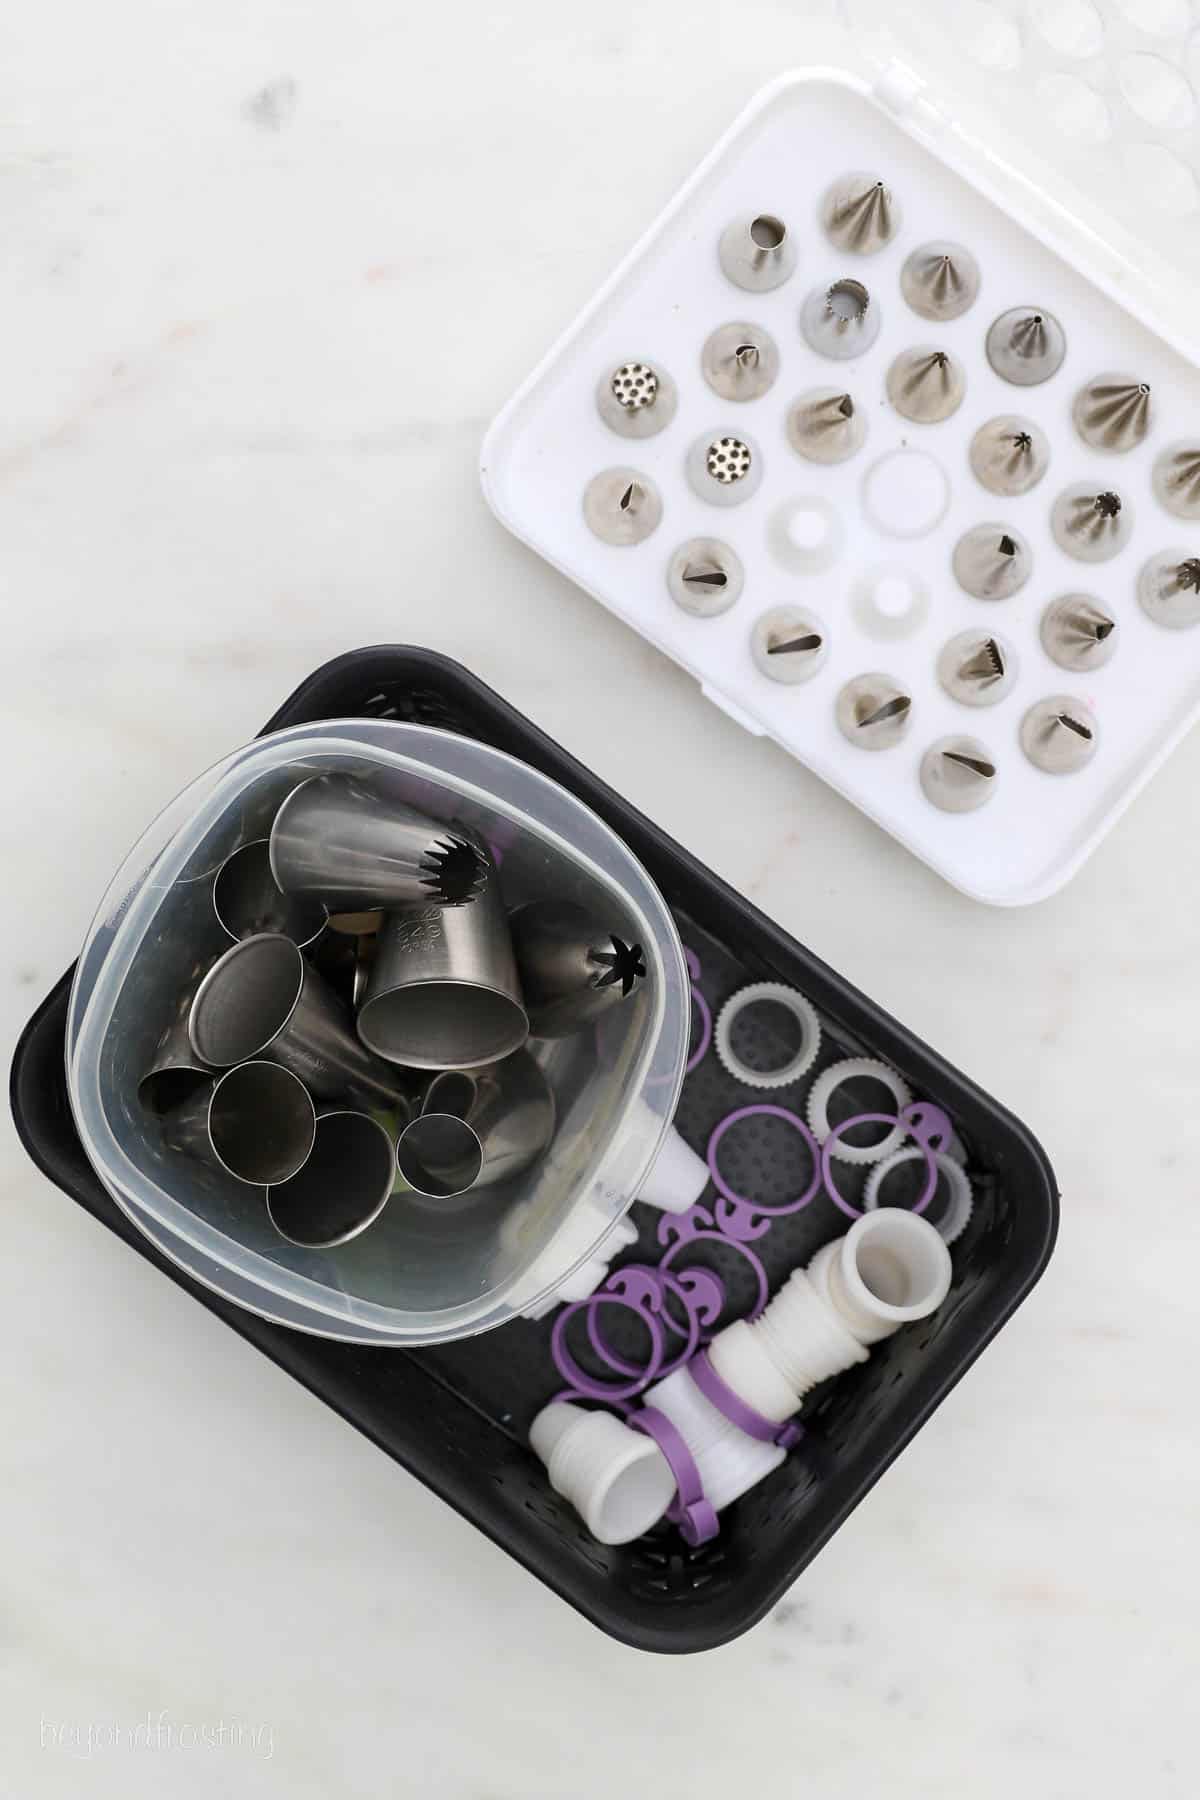 Overhead view of piping tips arranged on an organizing rack, next to a black container filled with more piping tips and couplers.